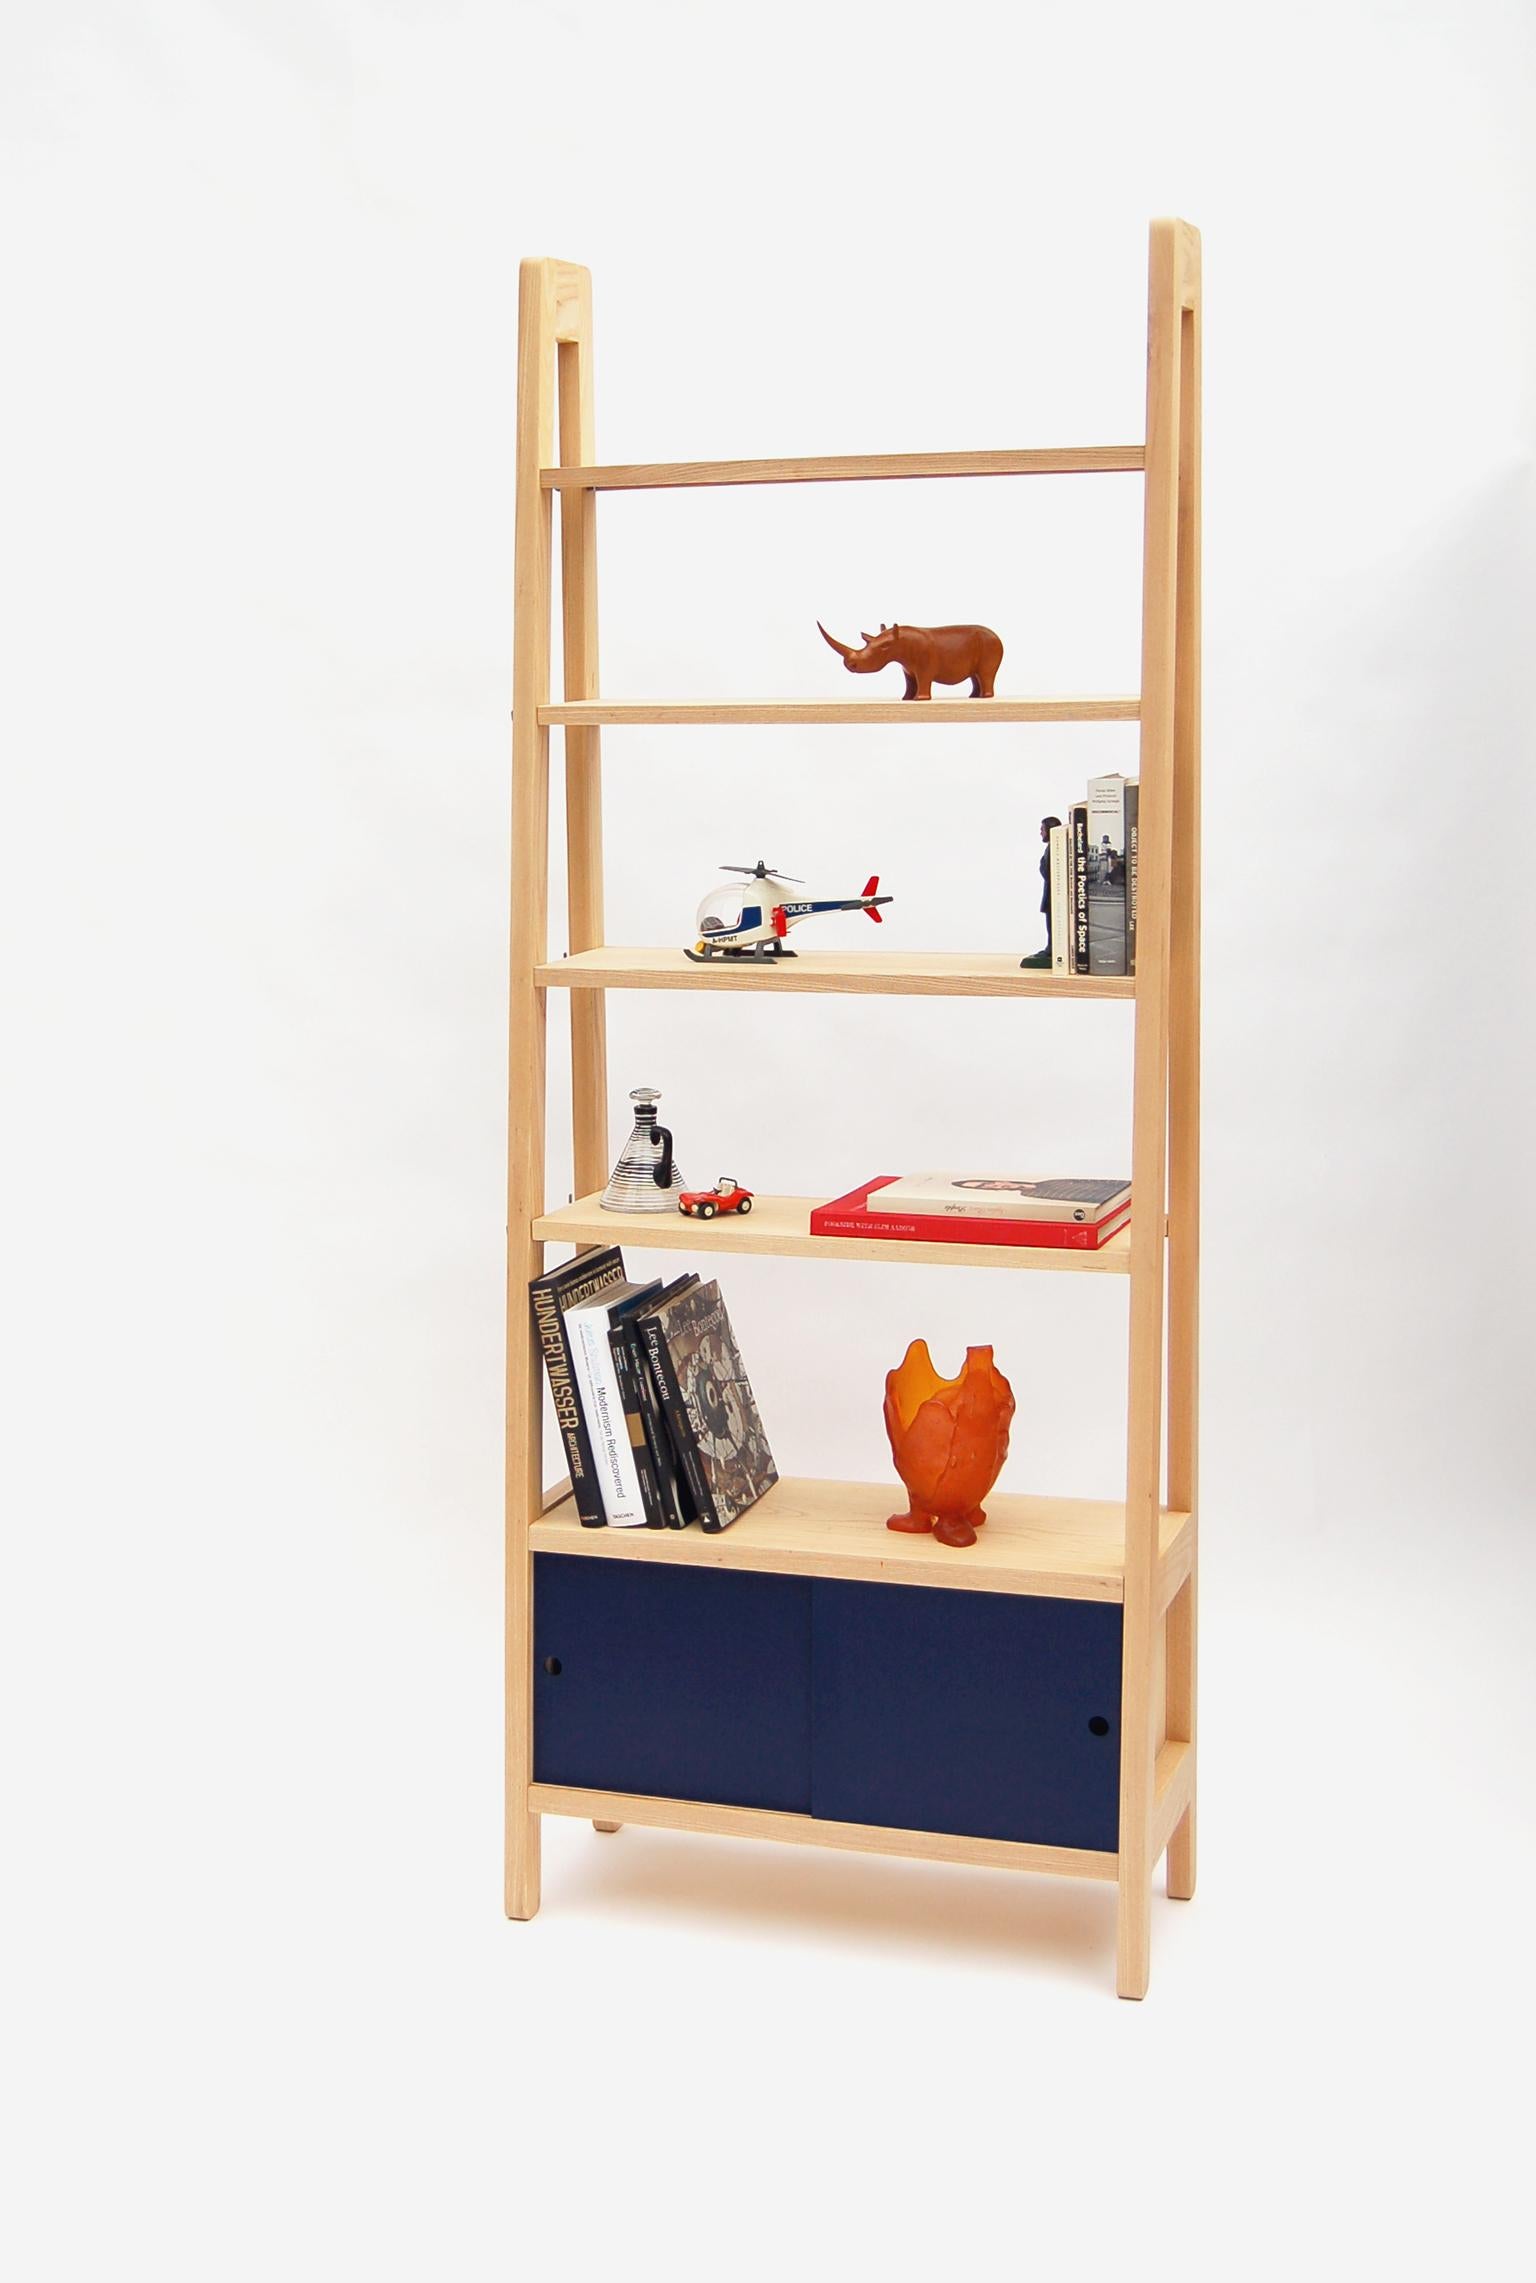 Live close to the things that matter most and hide the things that are better off hidden. As your collection grows, add another section. Inspired by modular wall units of the past. The Collector series has options for open shelving, closed storage